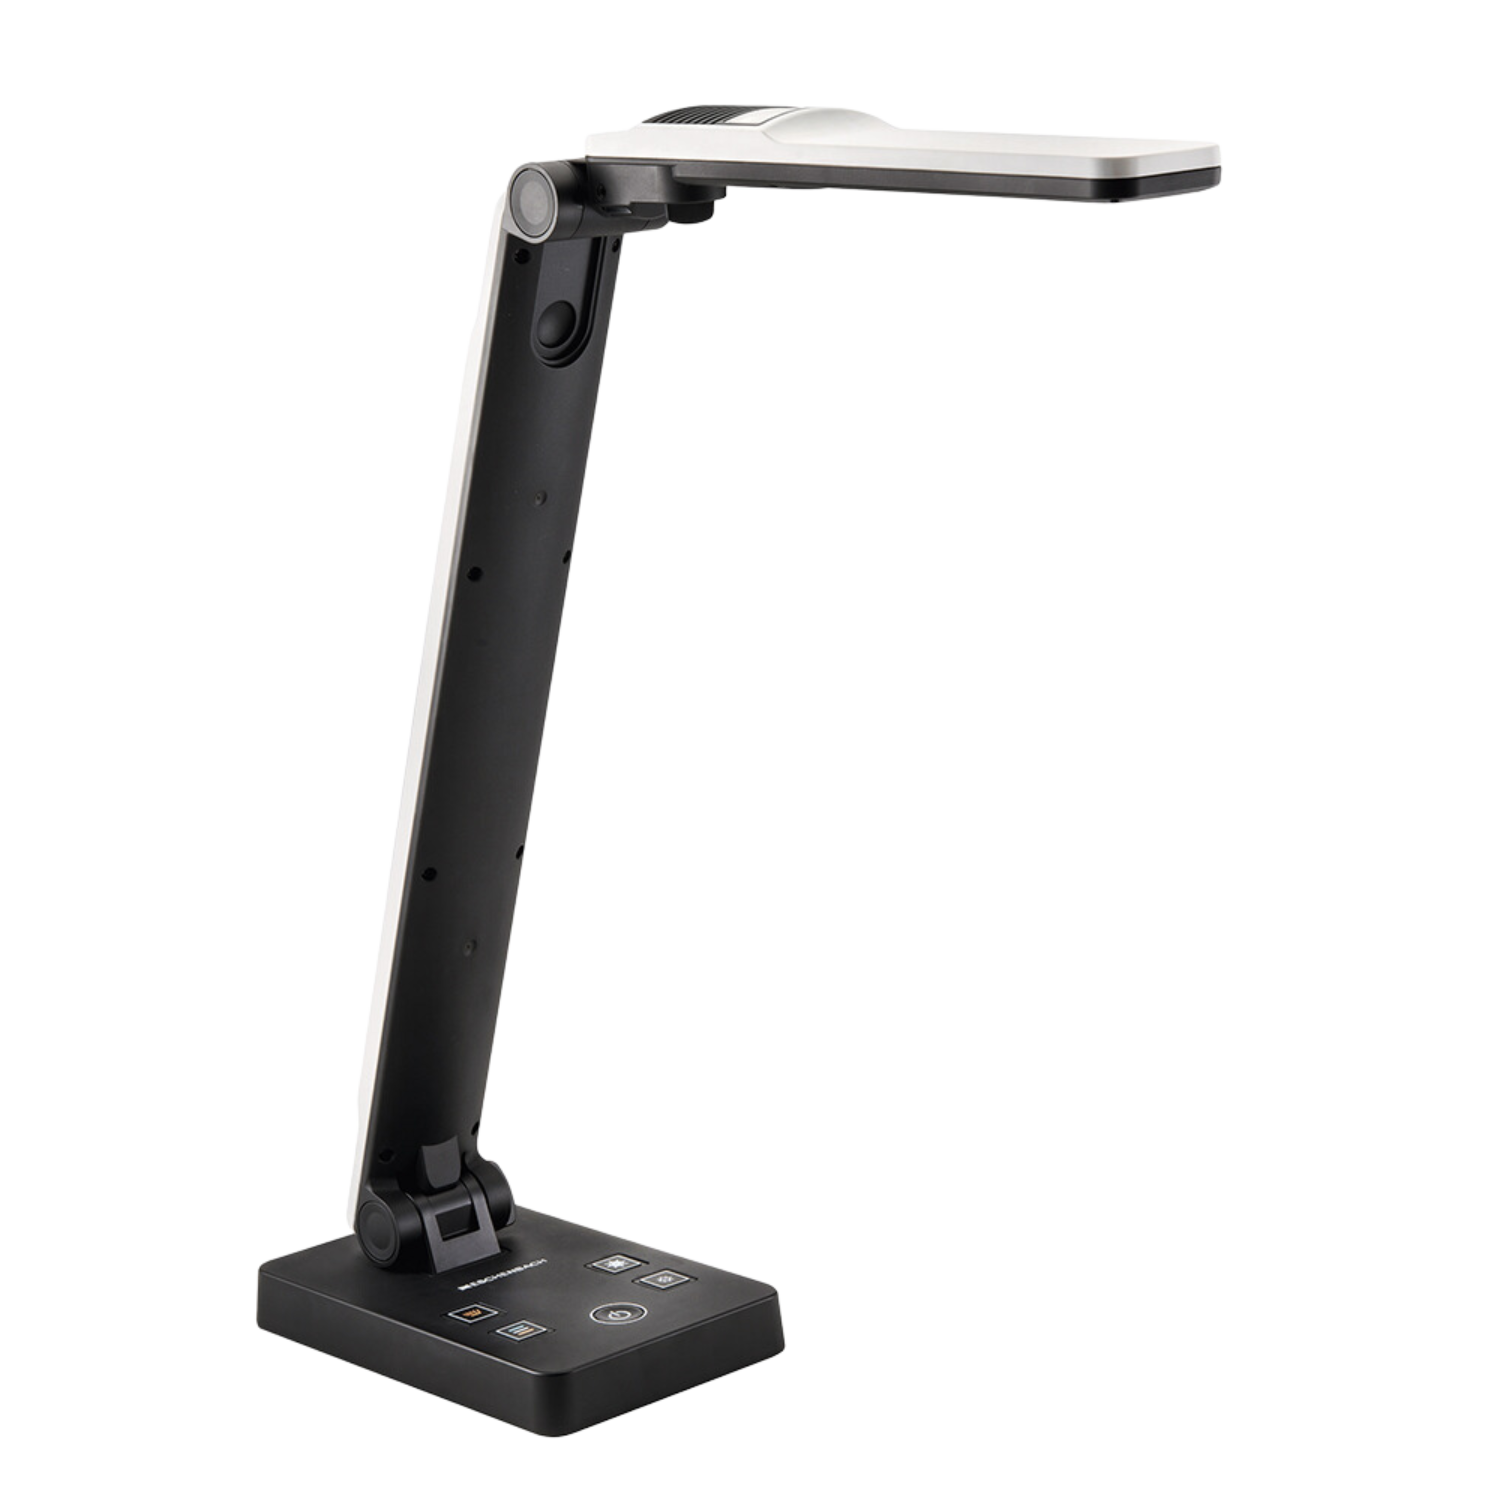 Image of the Elementis LED Desk Lamp from Eschenbach.